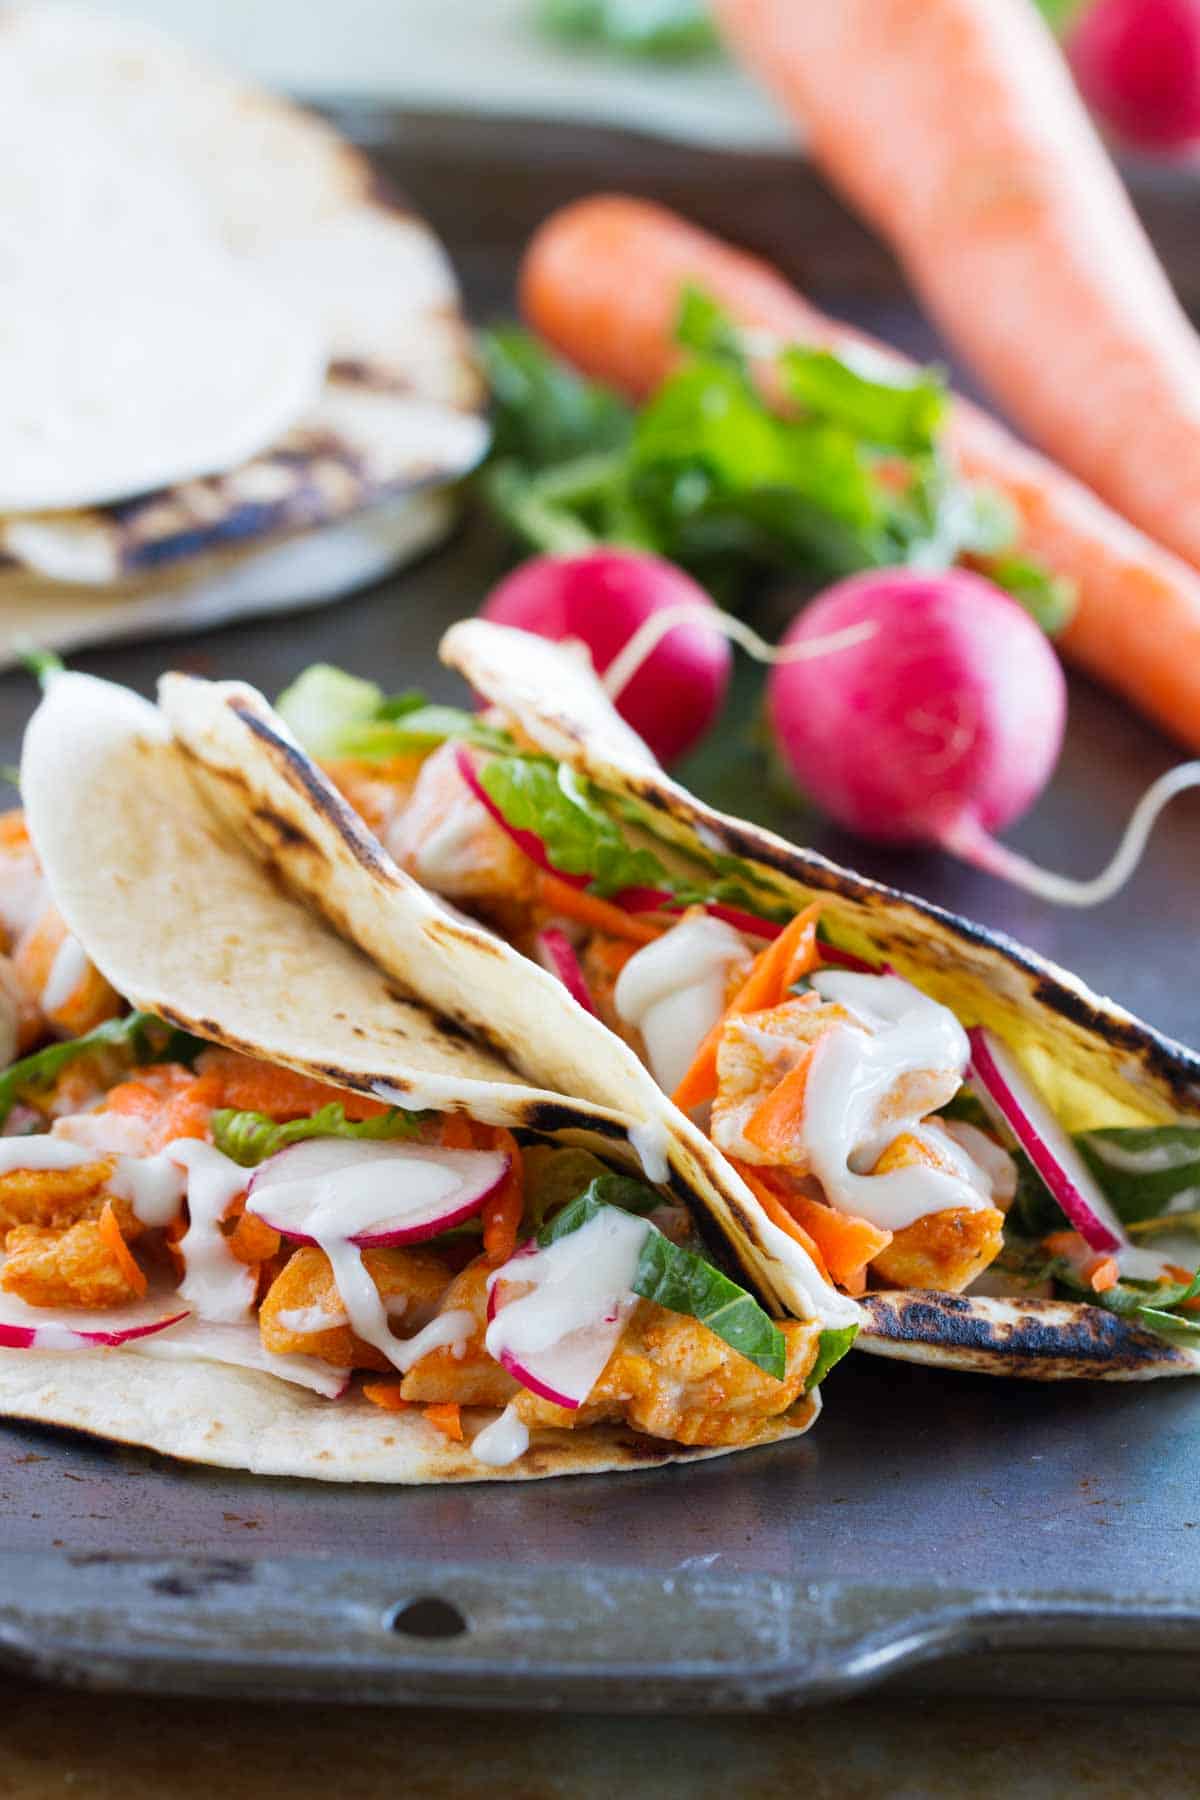 Buffalo Chicken Tacos made with buffalo chicken, lettuce, radishes, and blue cheese sauce.